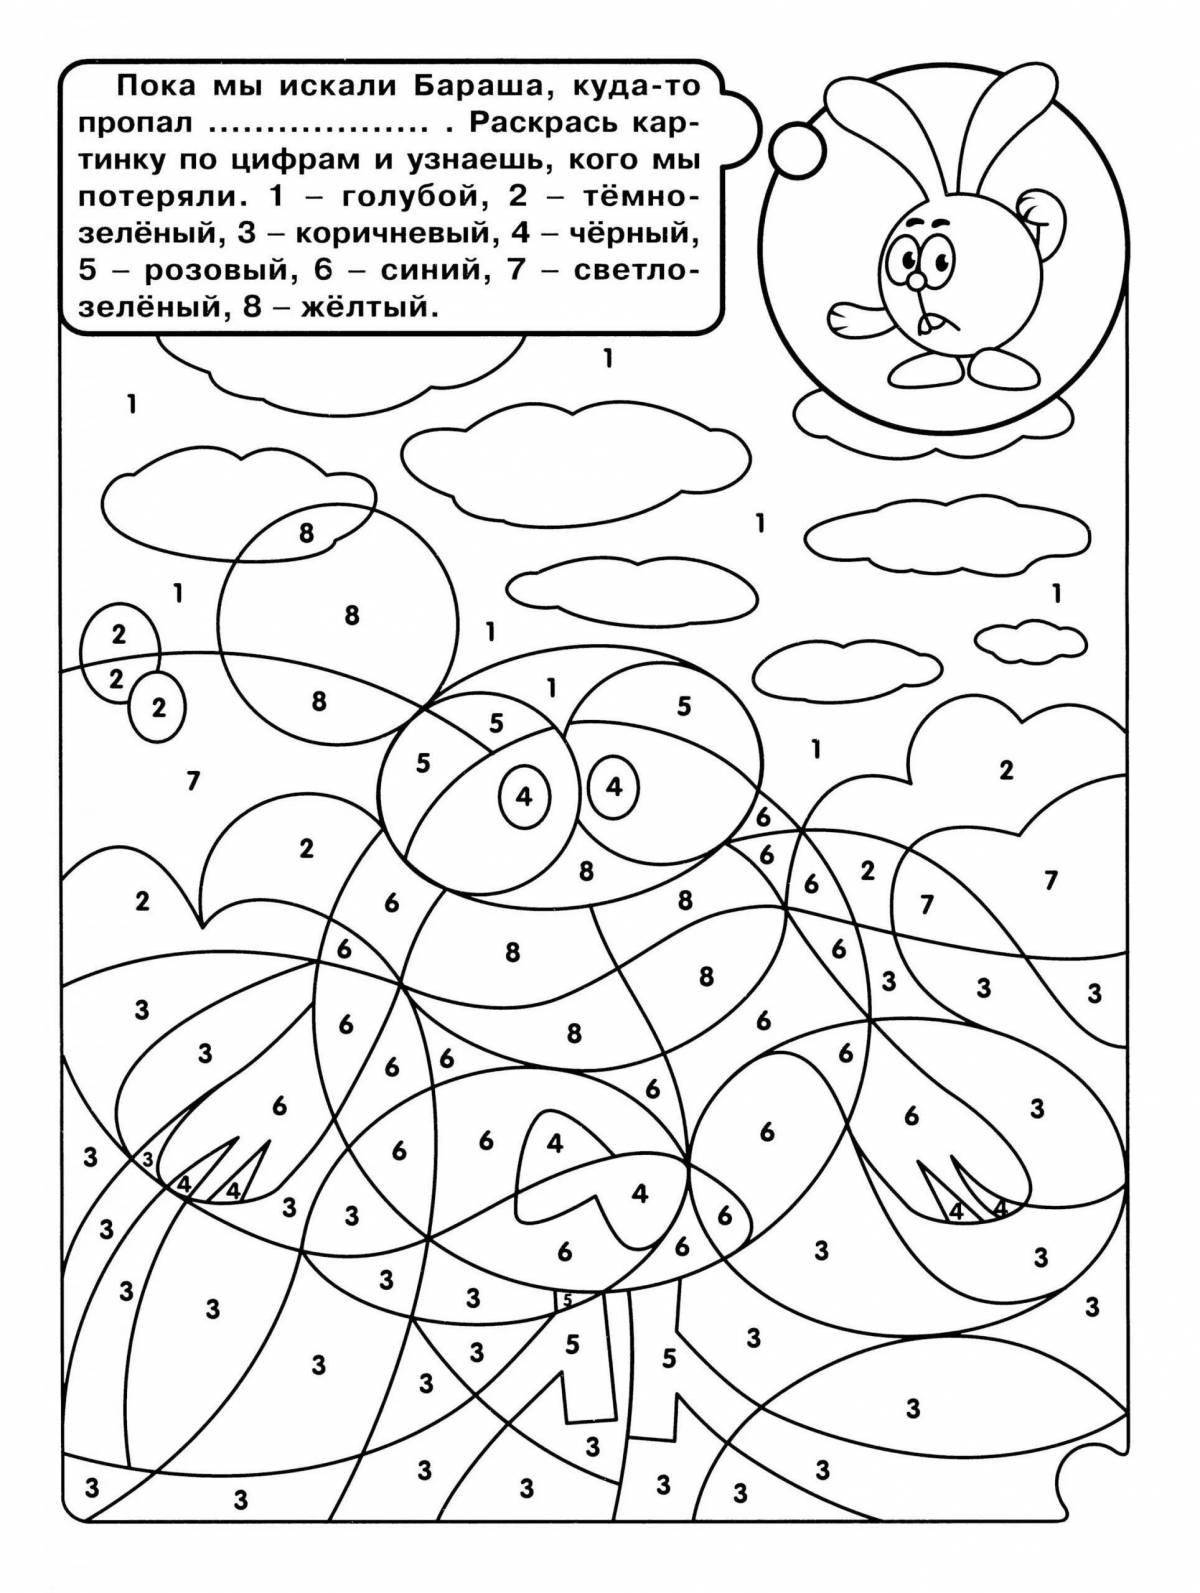 Fun coloring book for 6 to 7 year olds